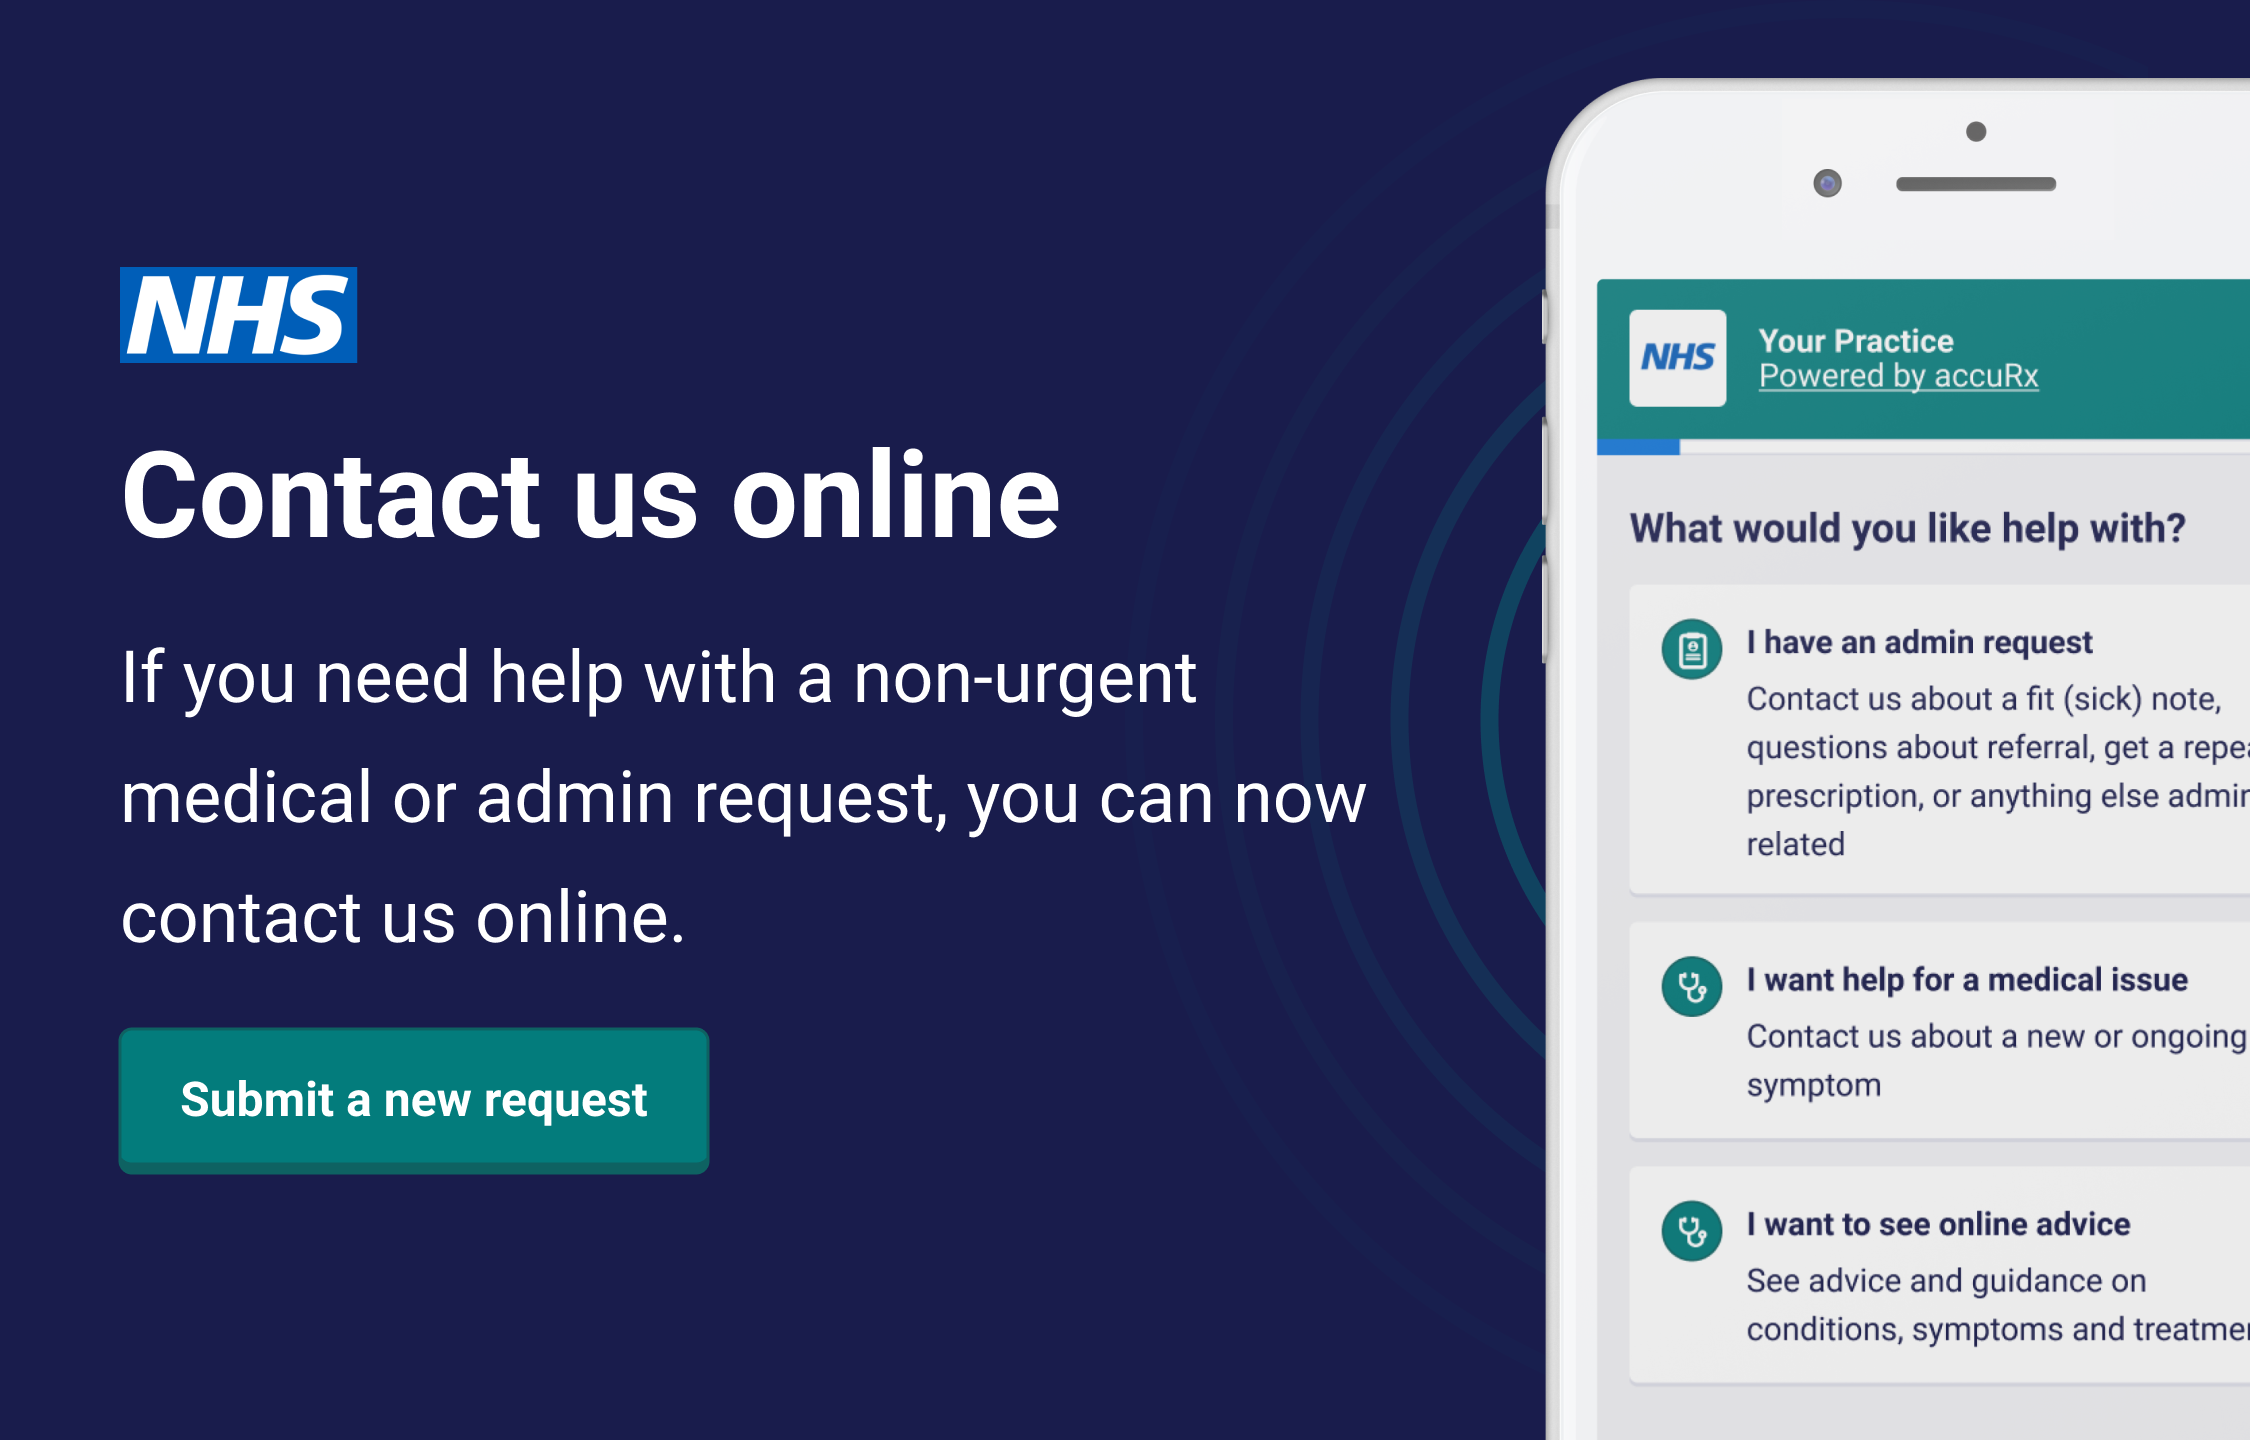 Contact us online. If you need help with a non-urgent medical or admin request, you can now contact us online. Submit a new request